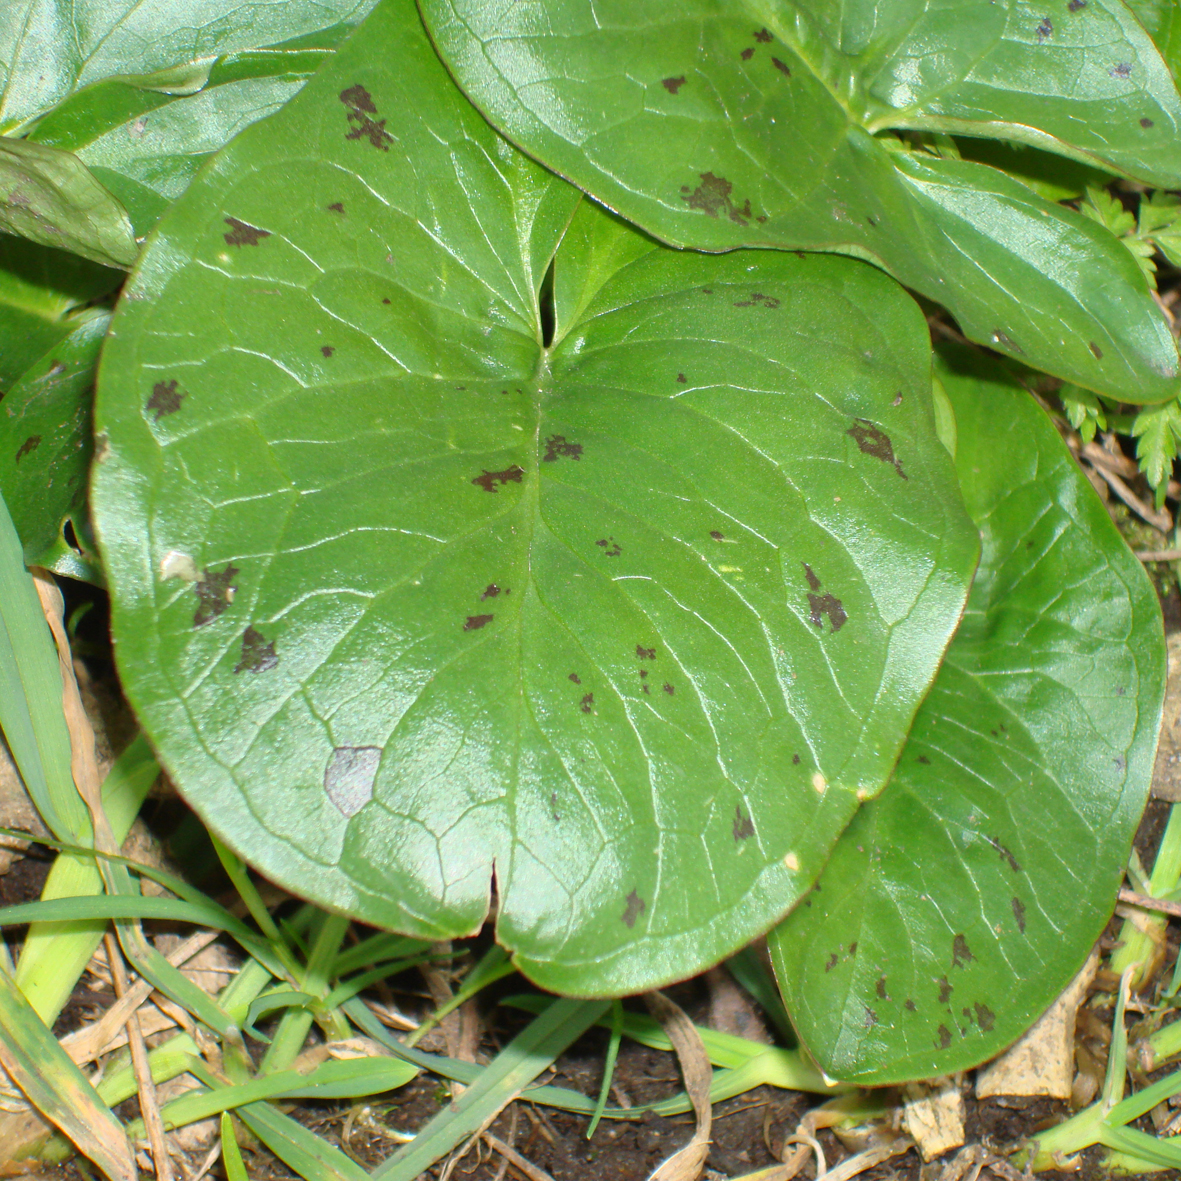 Cuckoo pint leaves with speckles